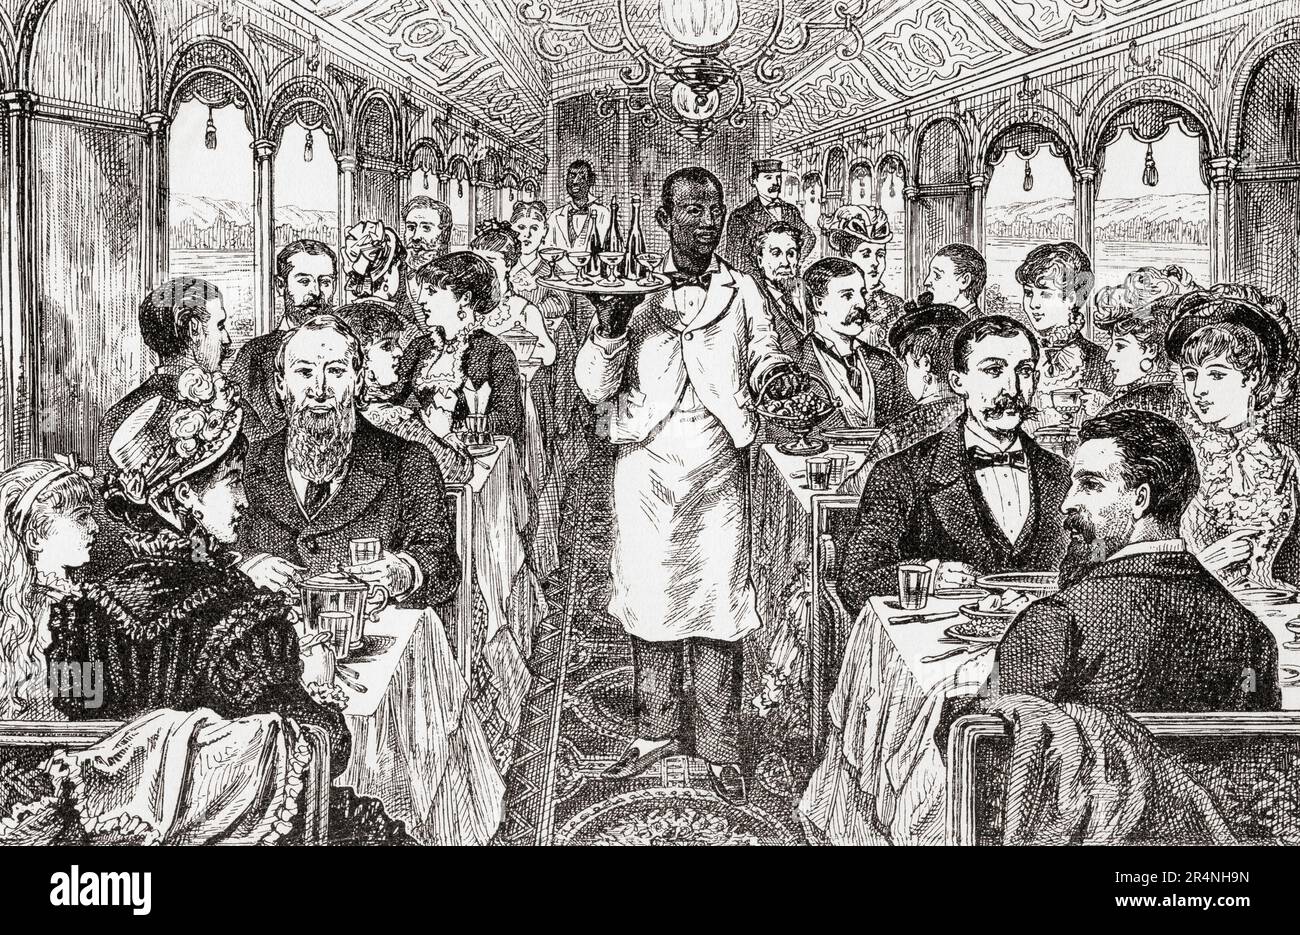 Passengers dining in a Pullman Parlour railway car, 19th century. From America Revisited: From The Bay of New York to The Gulf of Mexico, published 1886. Stock Photo